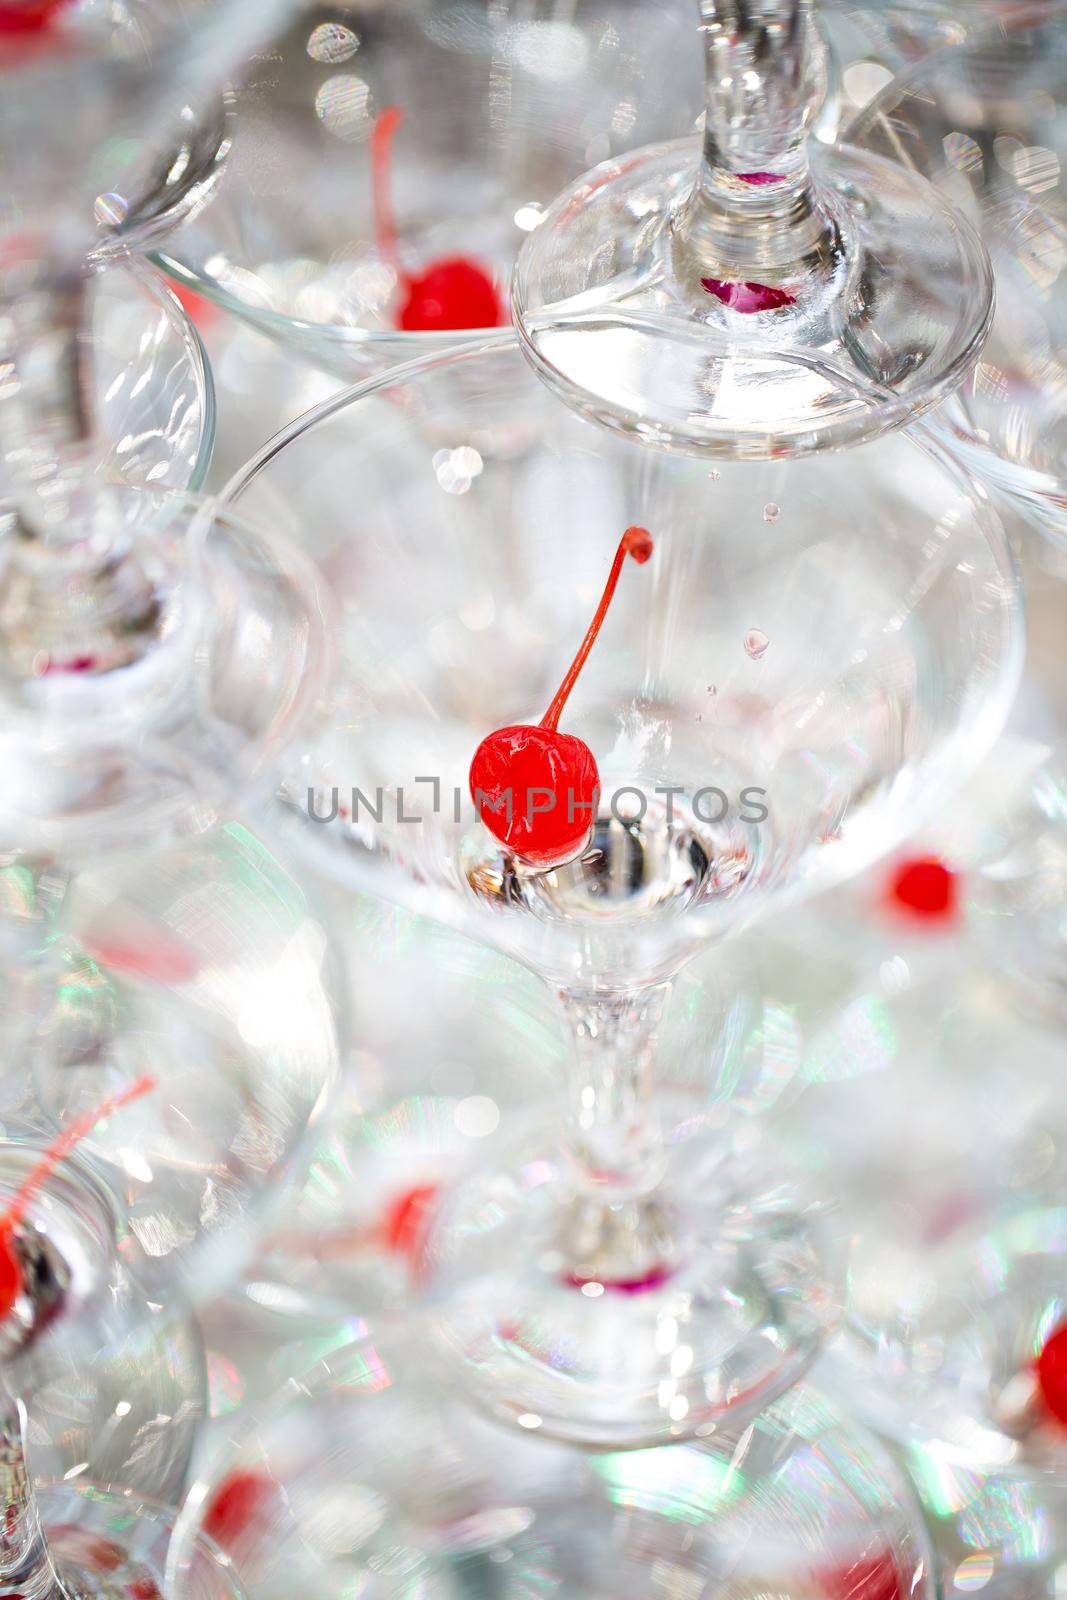 Pyramid of glasses, cherry in the glass. by StudioPeace